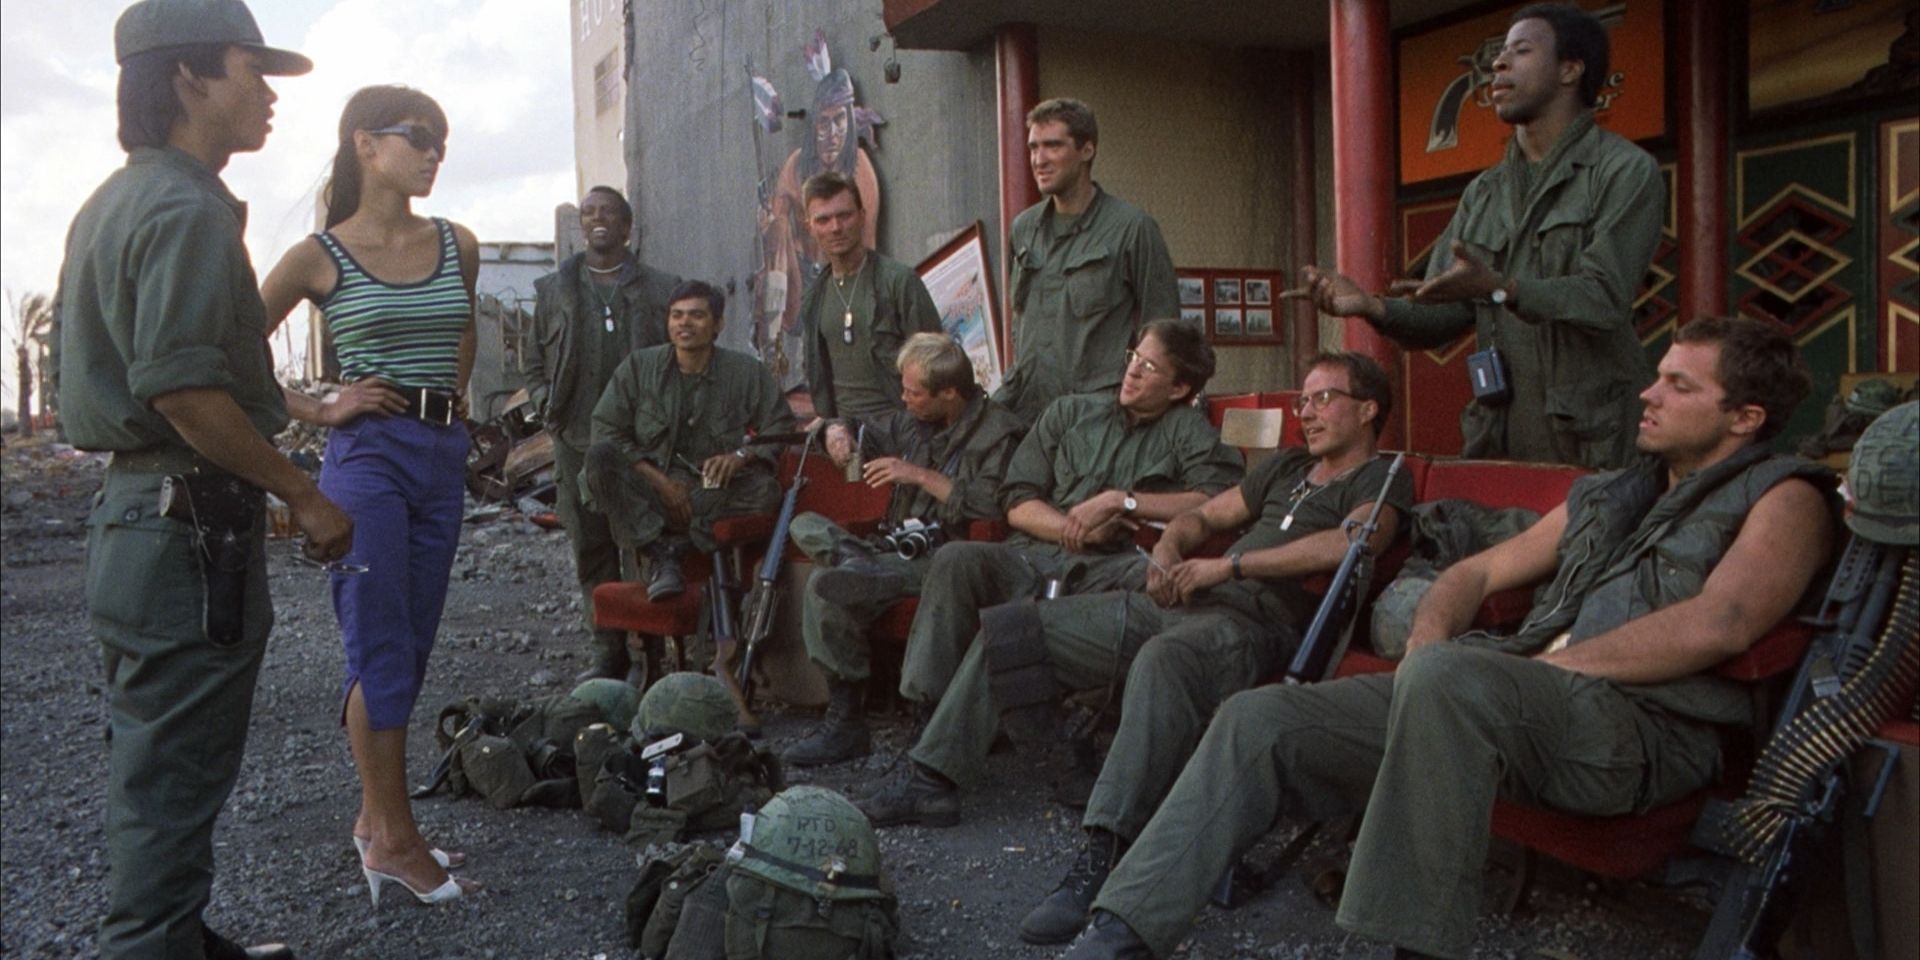 Born To Kill 10 BehindTheScenes Facts About Full Metal Jacket